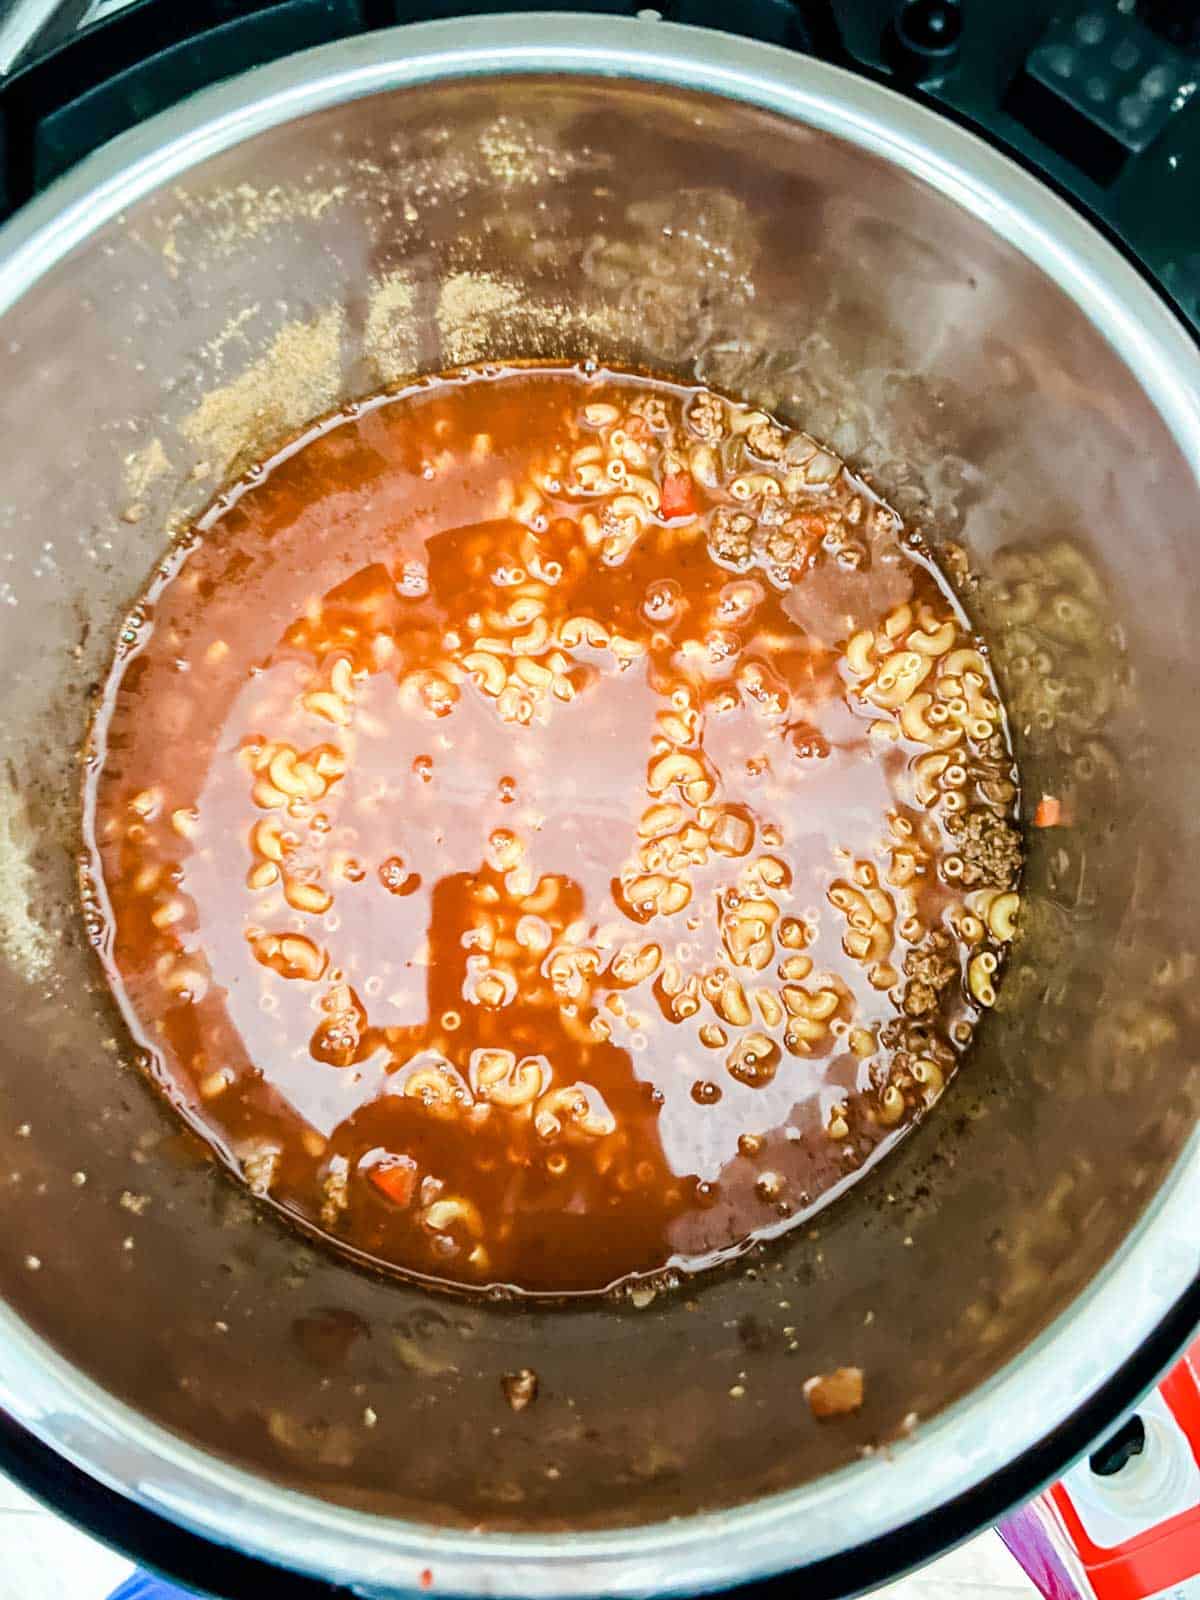 Noodles submerged in liquid in an Instant Pot.